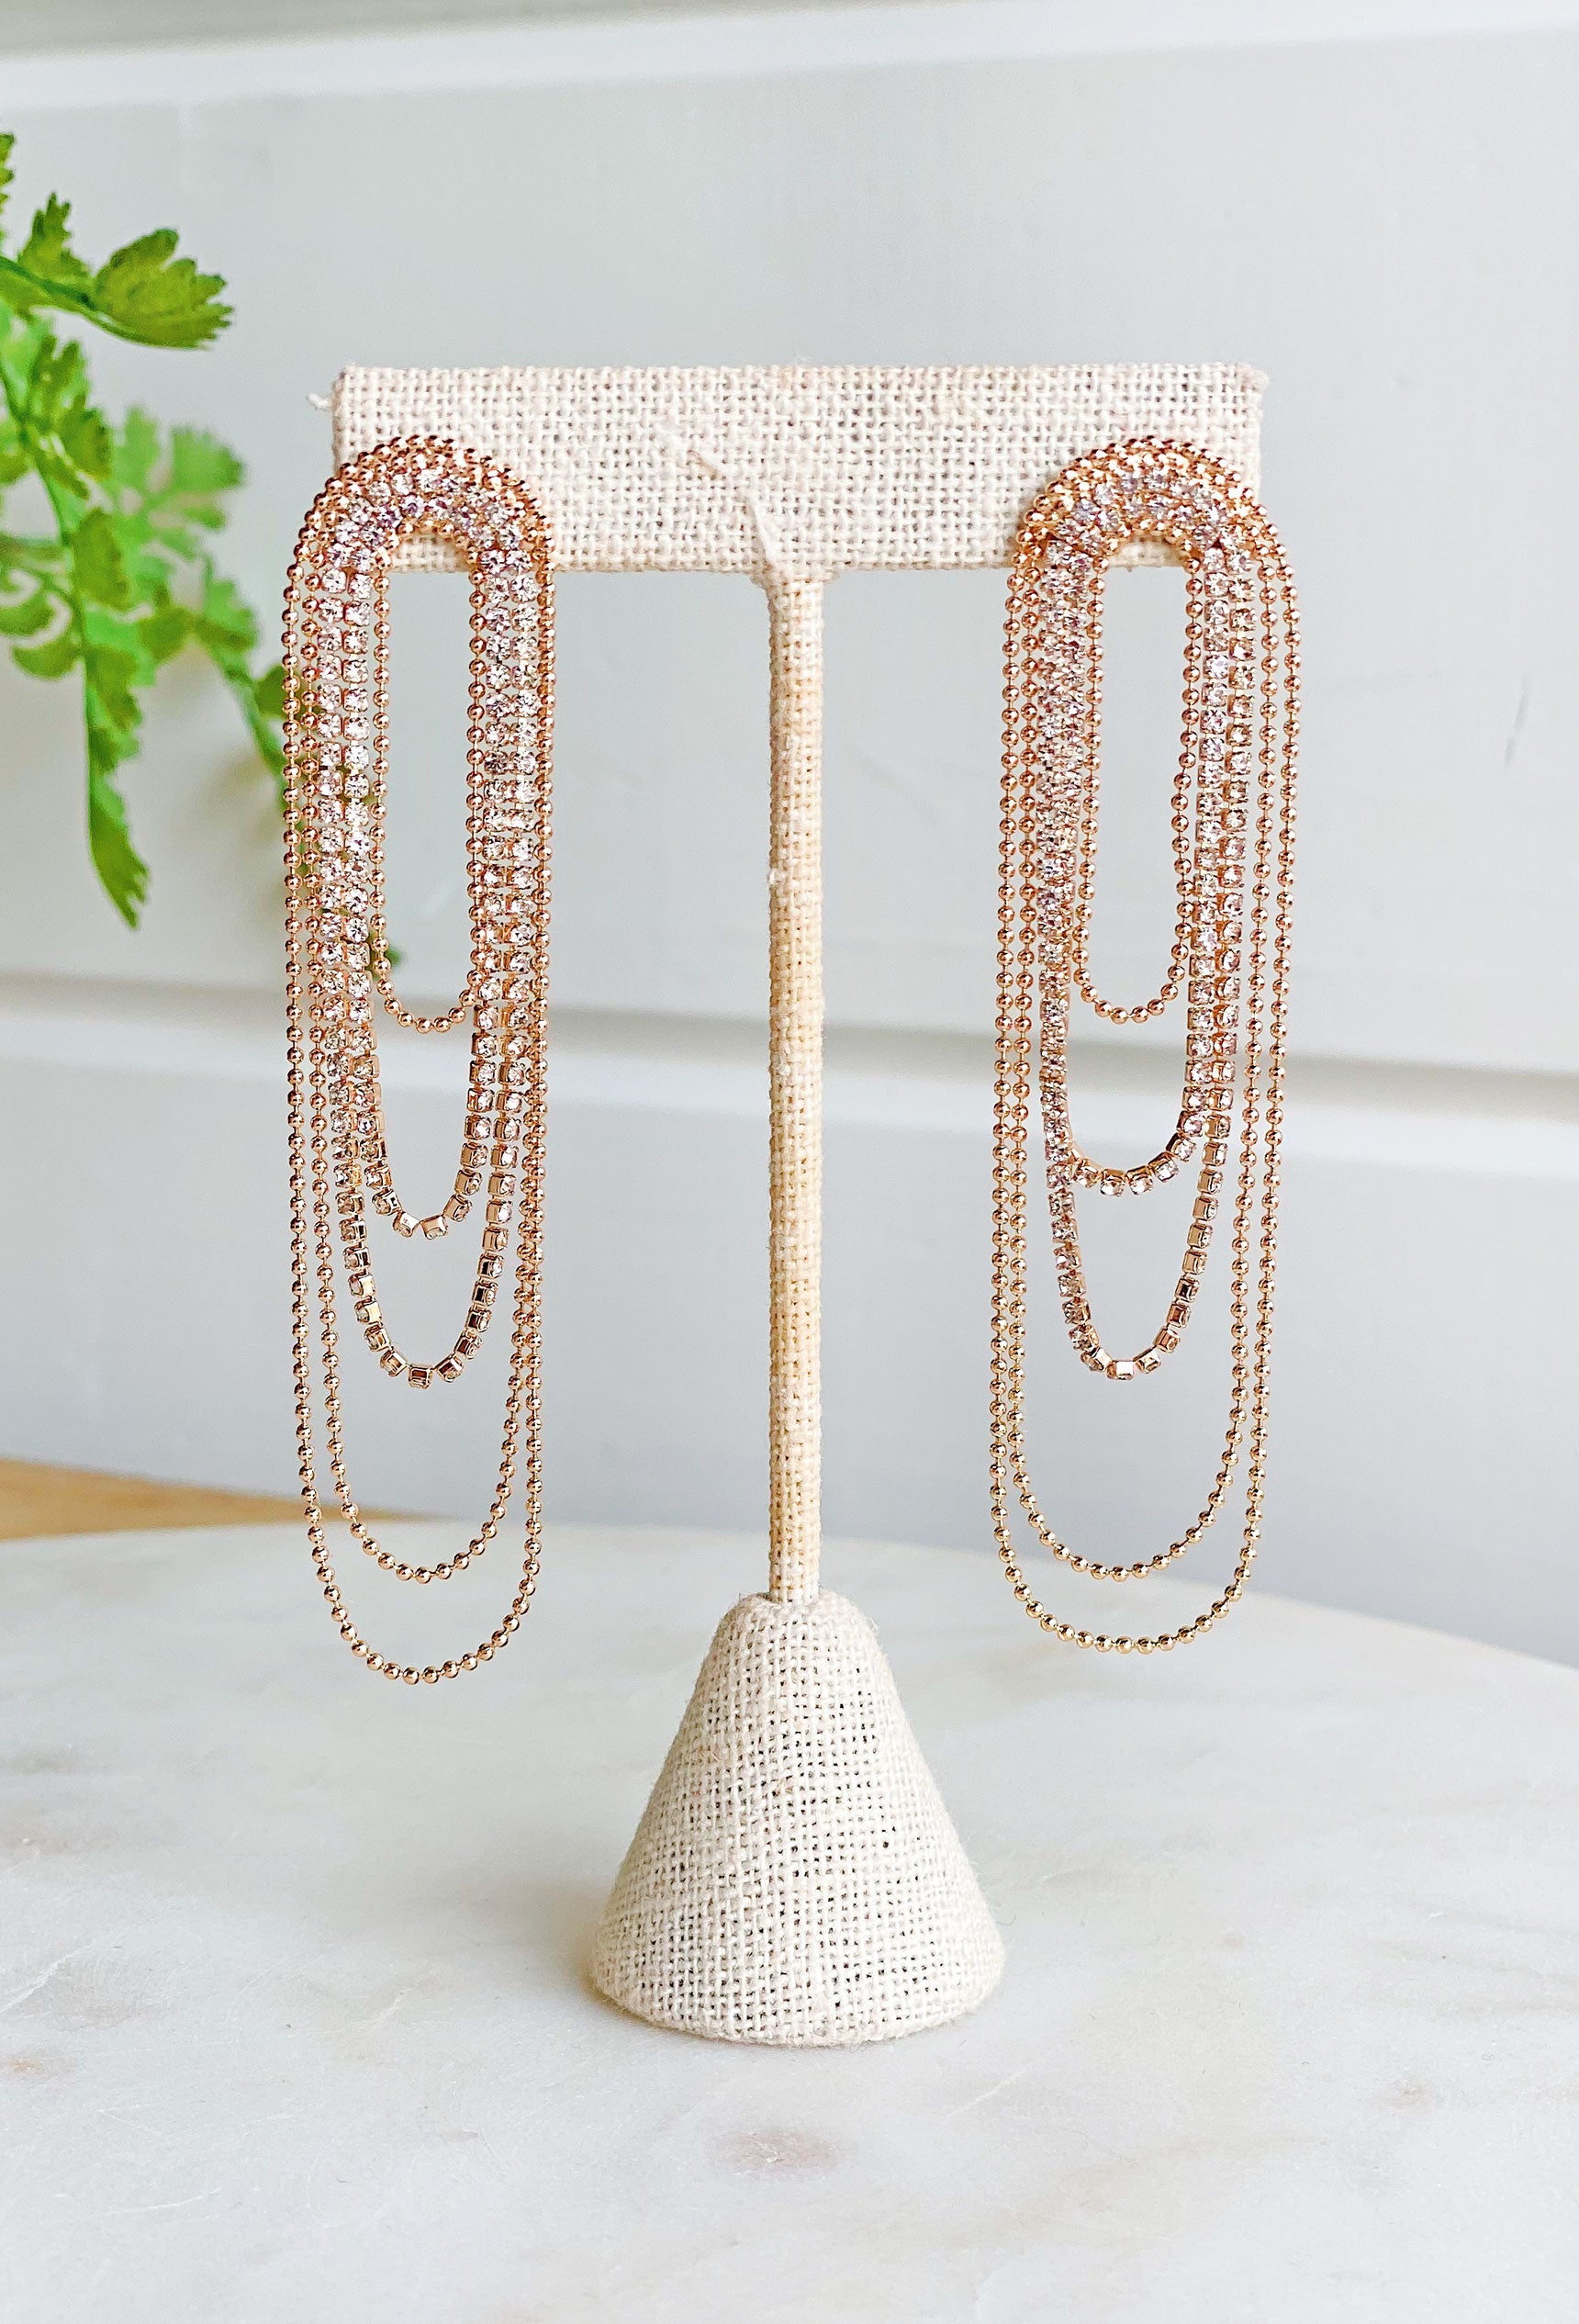 Sparks Fly Earrings, gold pave and chain drop earrings